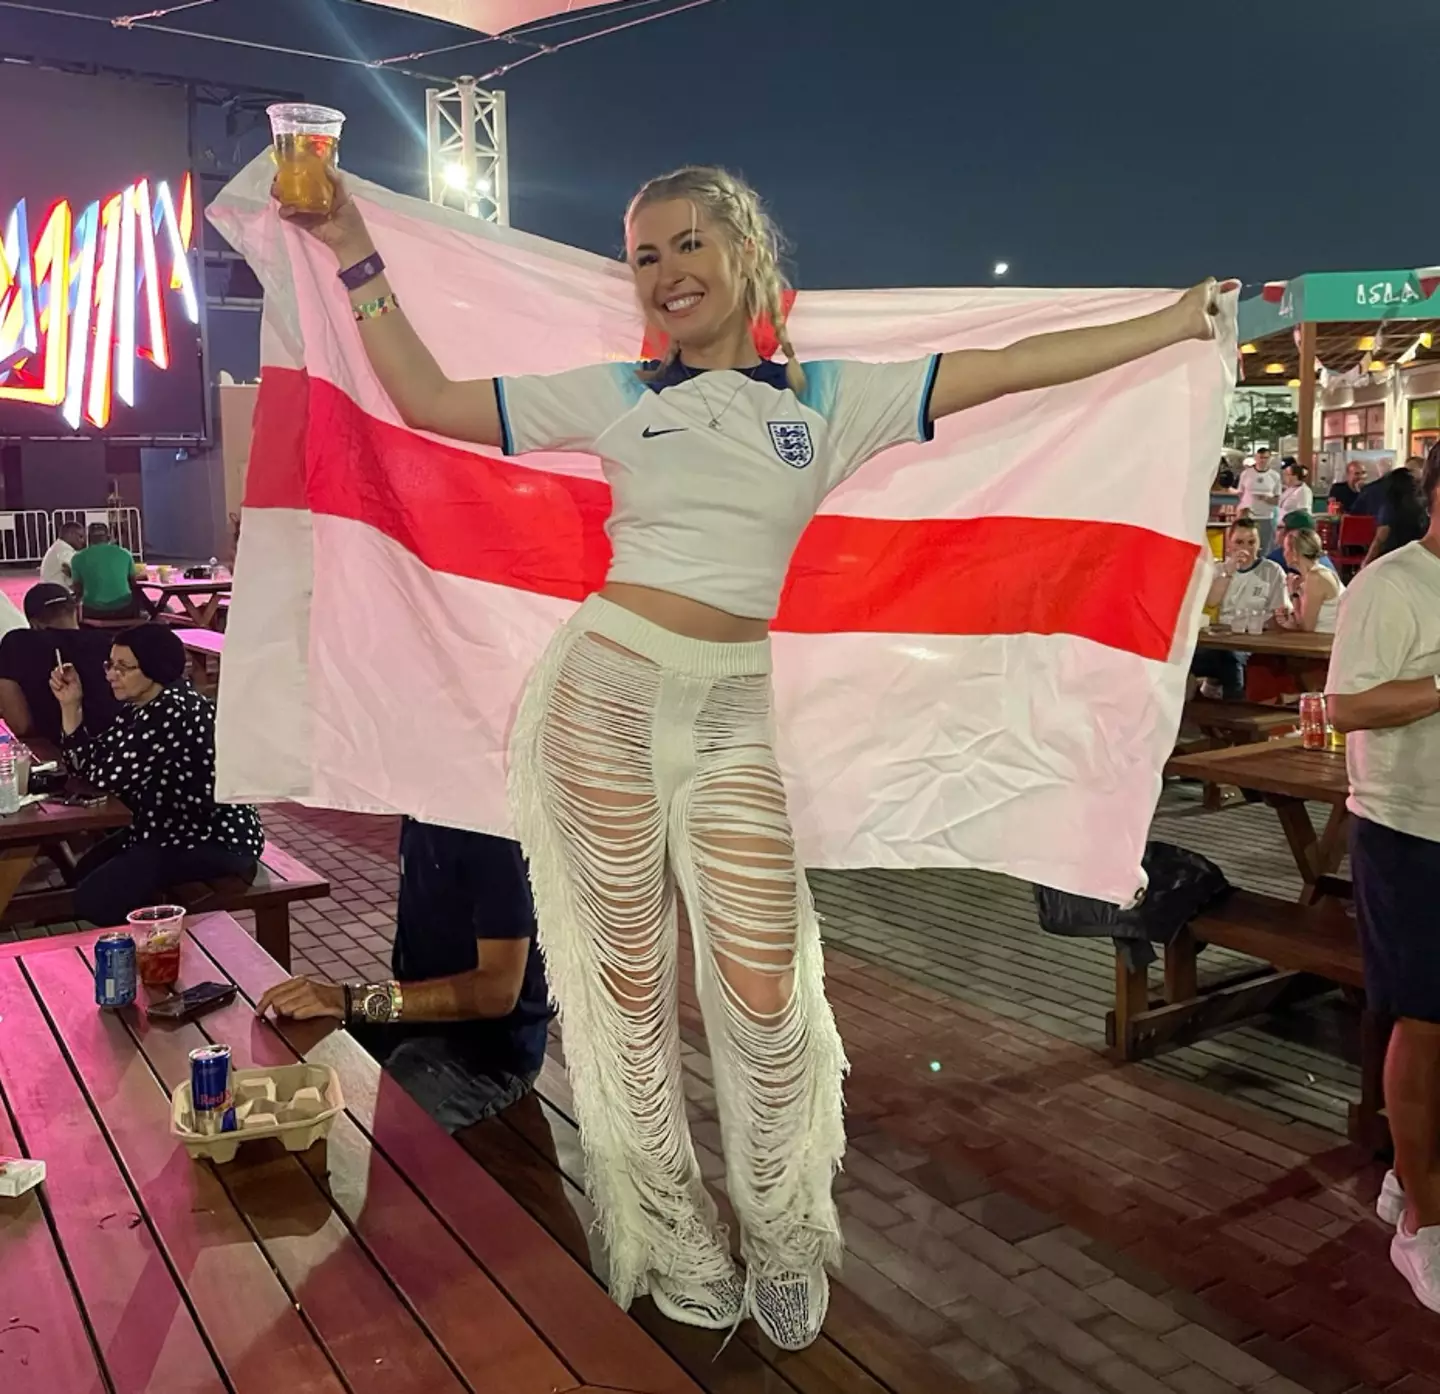 Astrid has been supporting the Three Lions in Qatar.